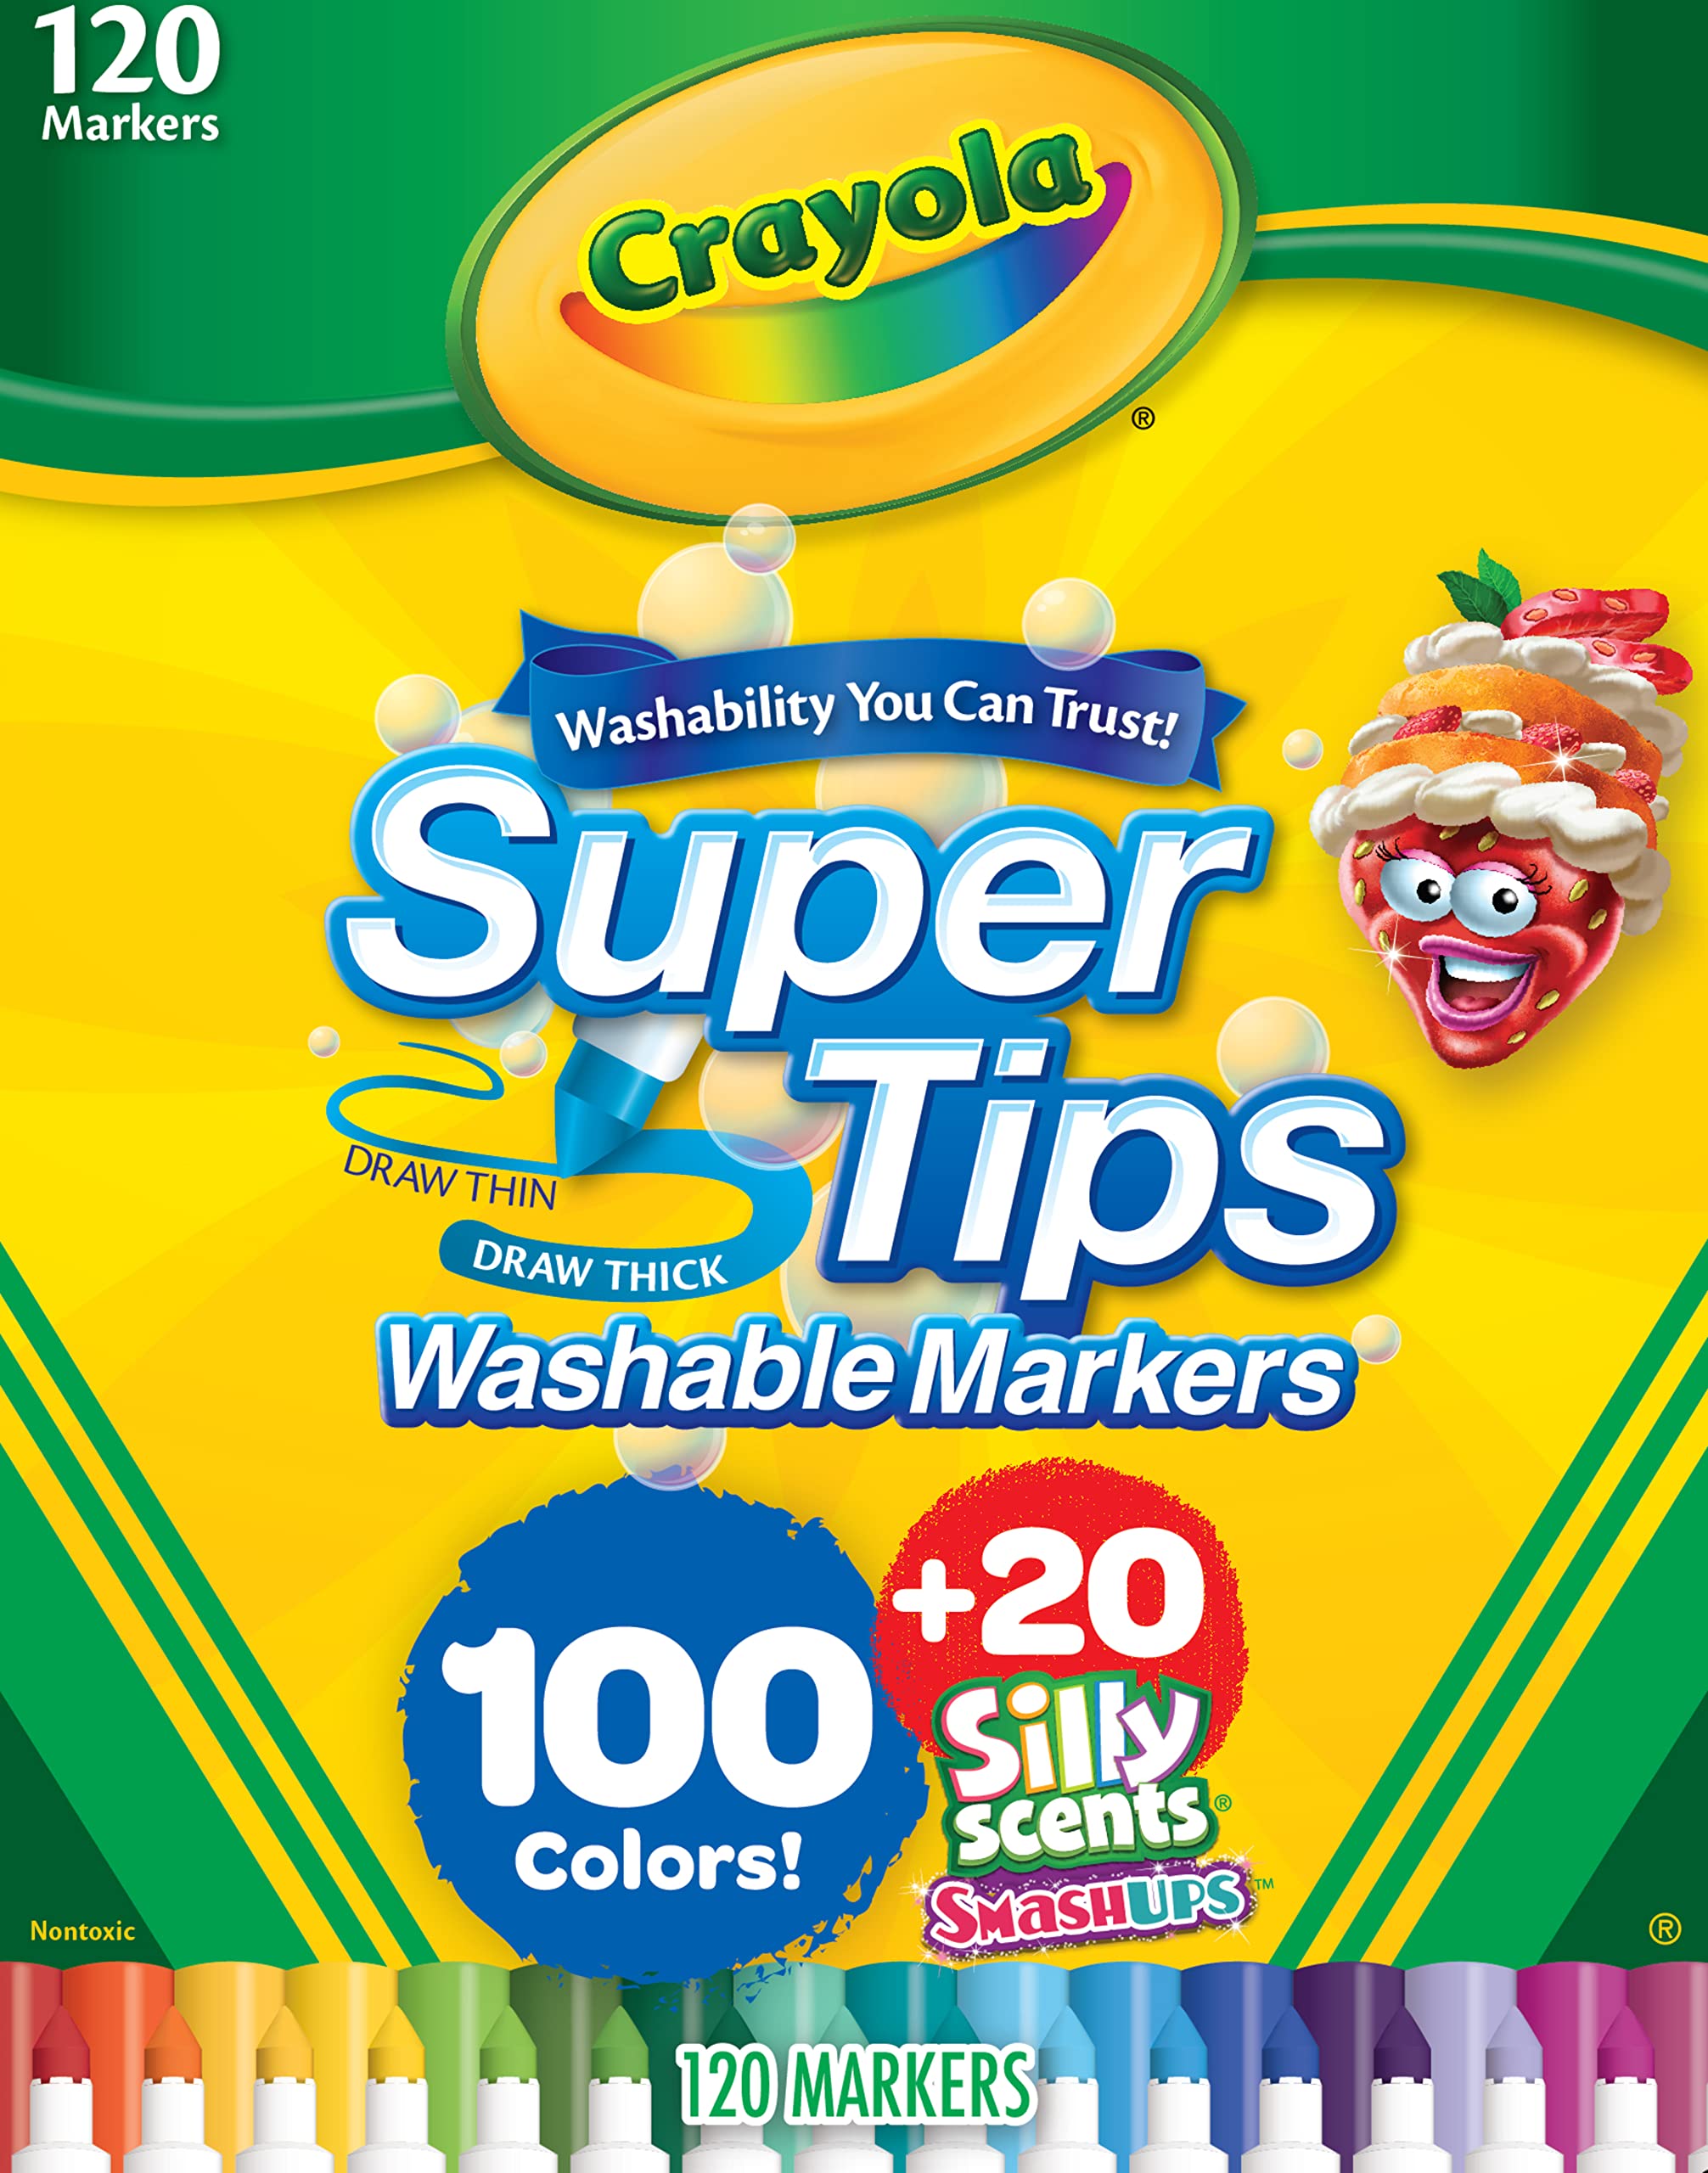 Crayola Super Tips Bulk Marker Set with Silly Scents Smash Ups, Kids Washable & Scented Markers, 120 Count, Gifts for Kids